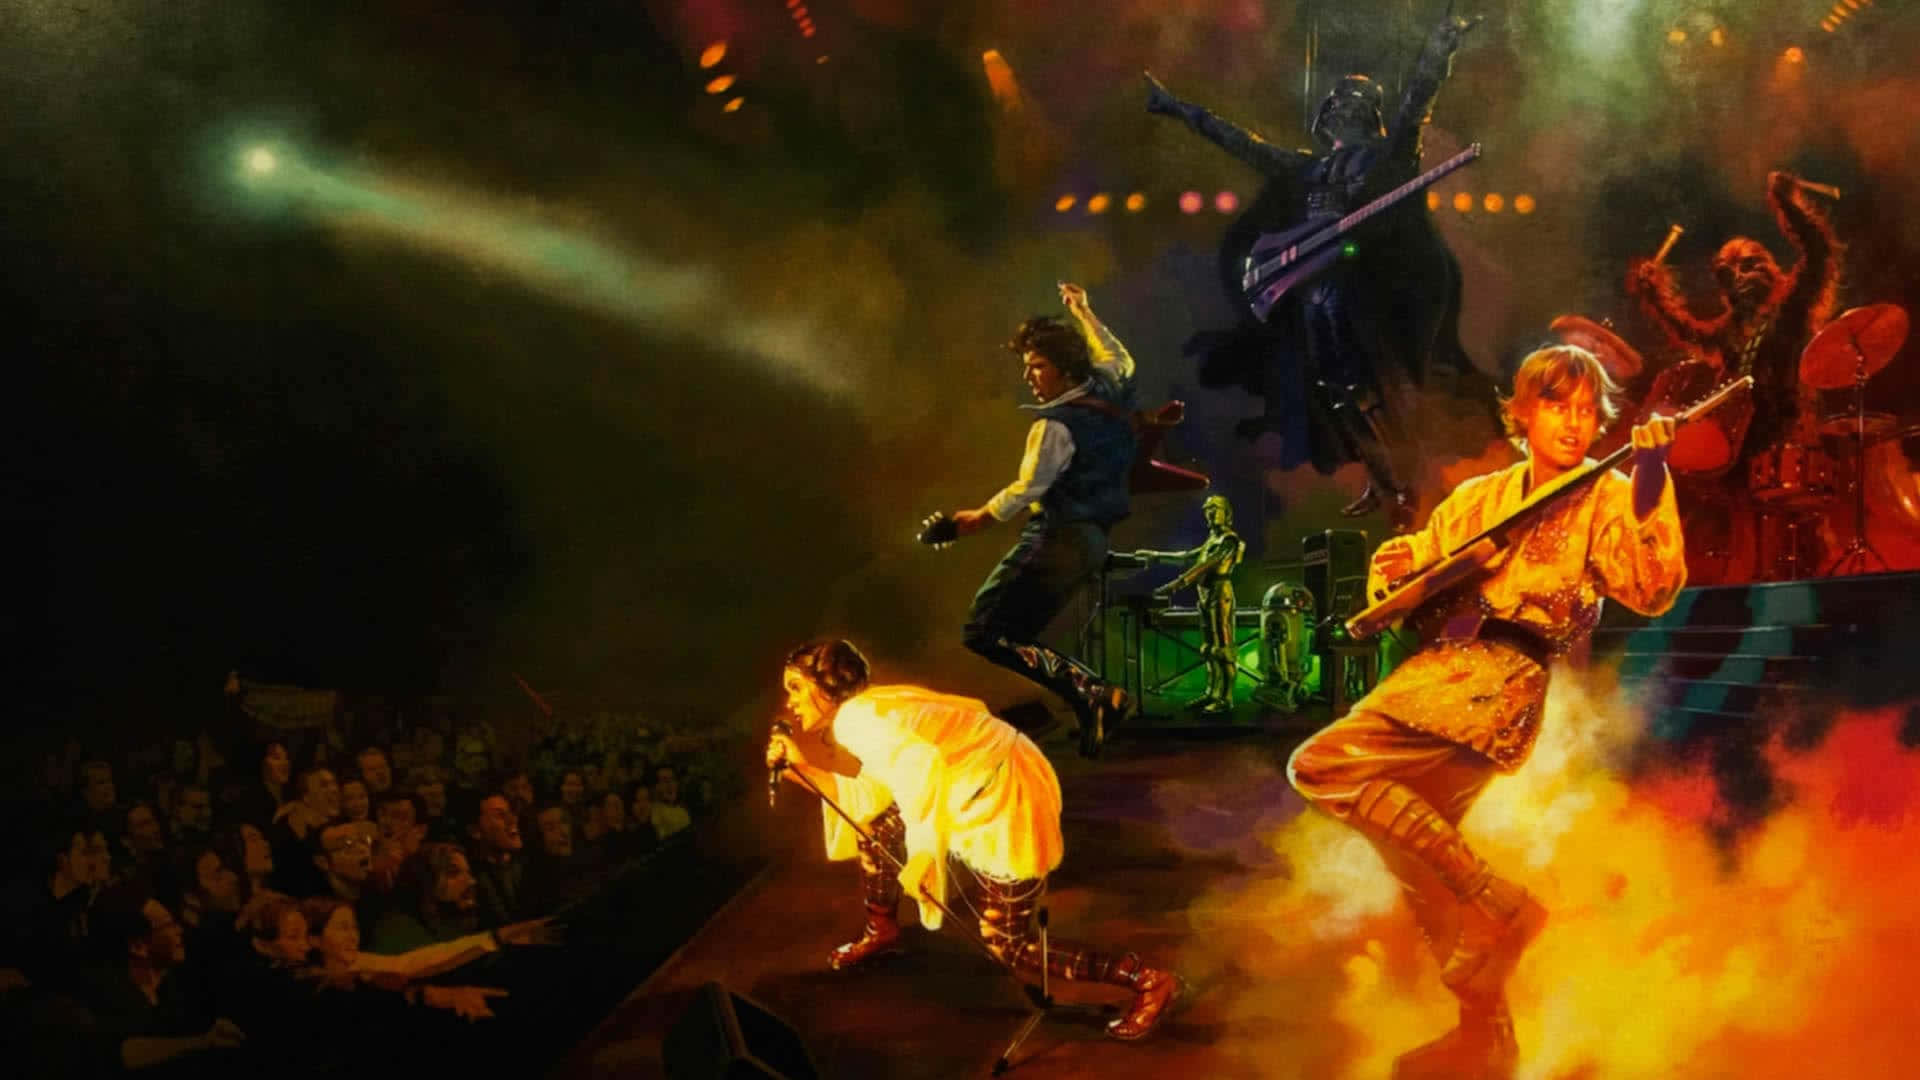 A Painting Of A Band On Stage With Smoke